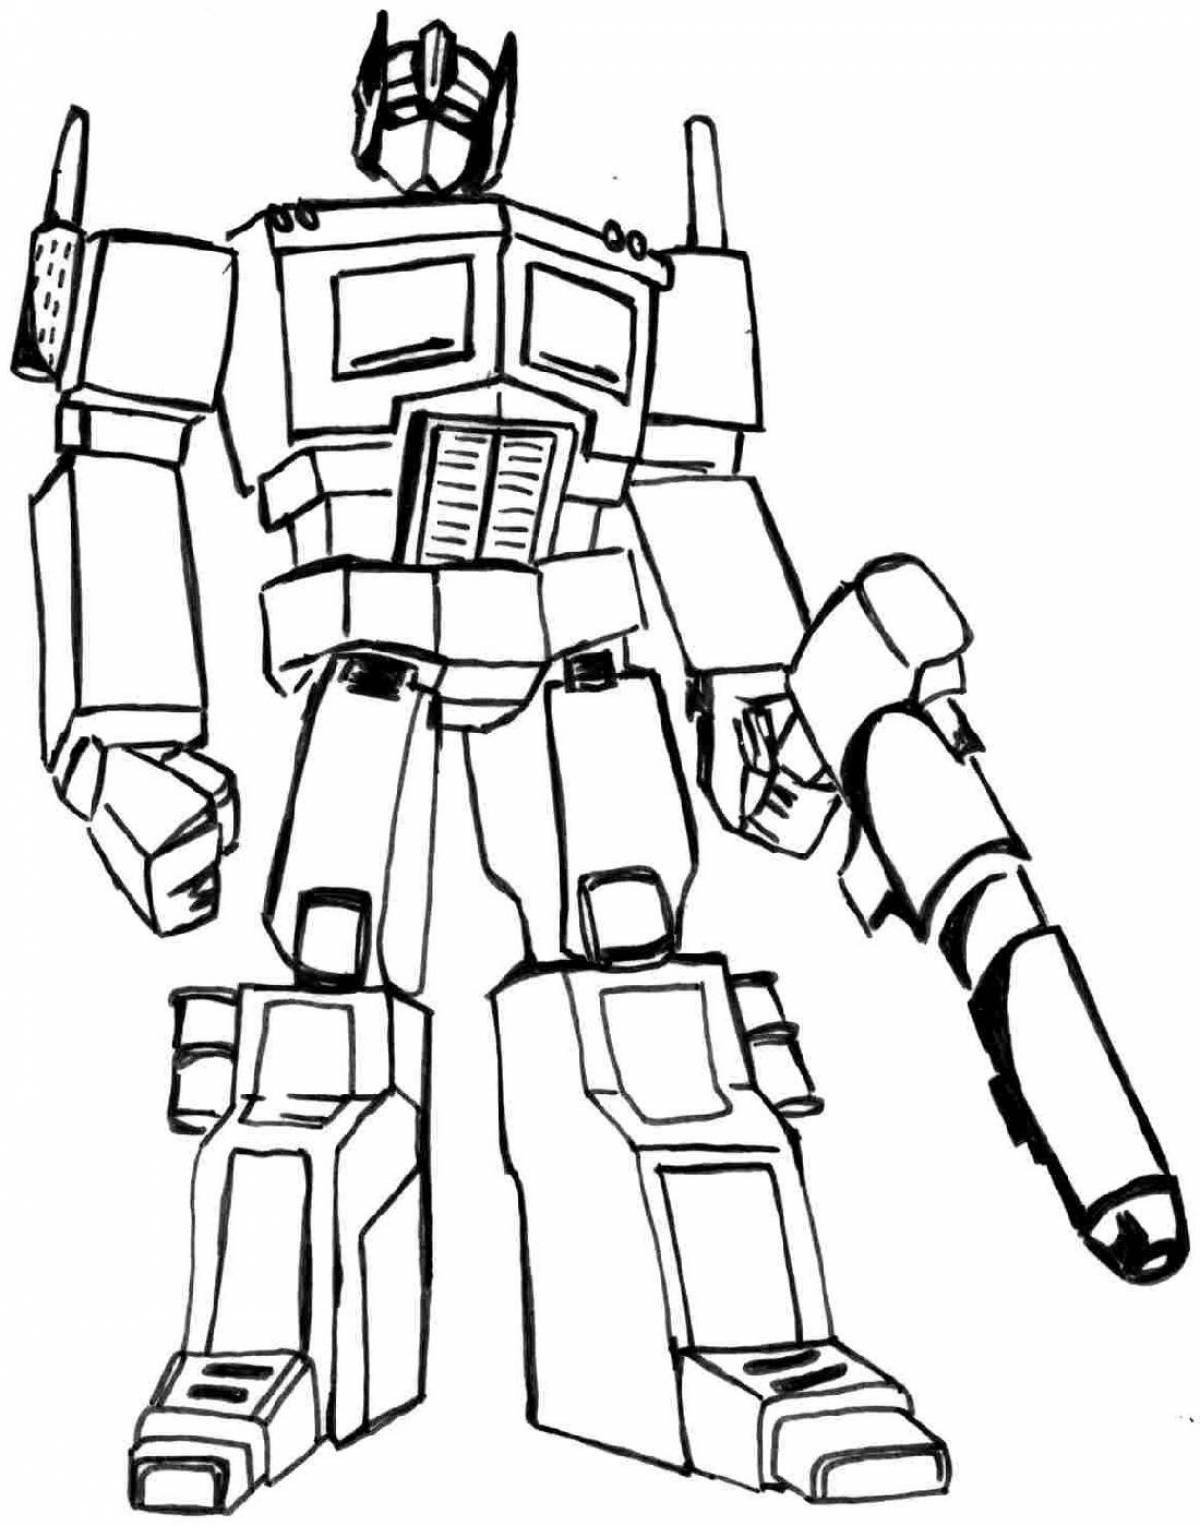 Detailed Transforming Robot Coloring Page